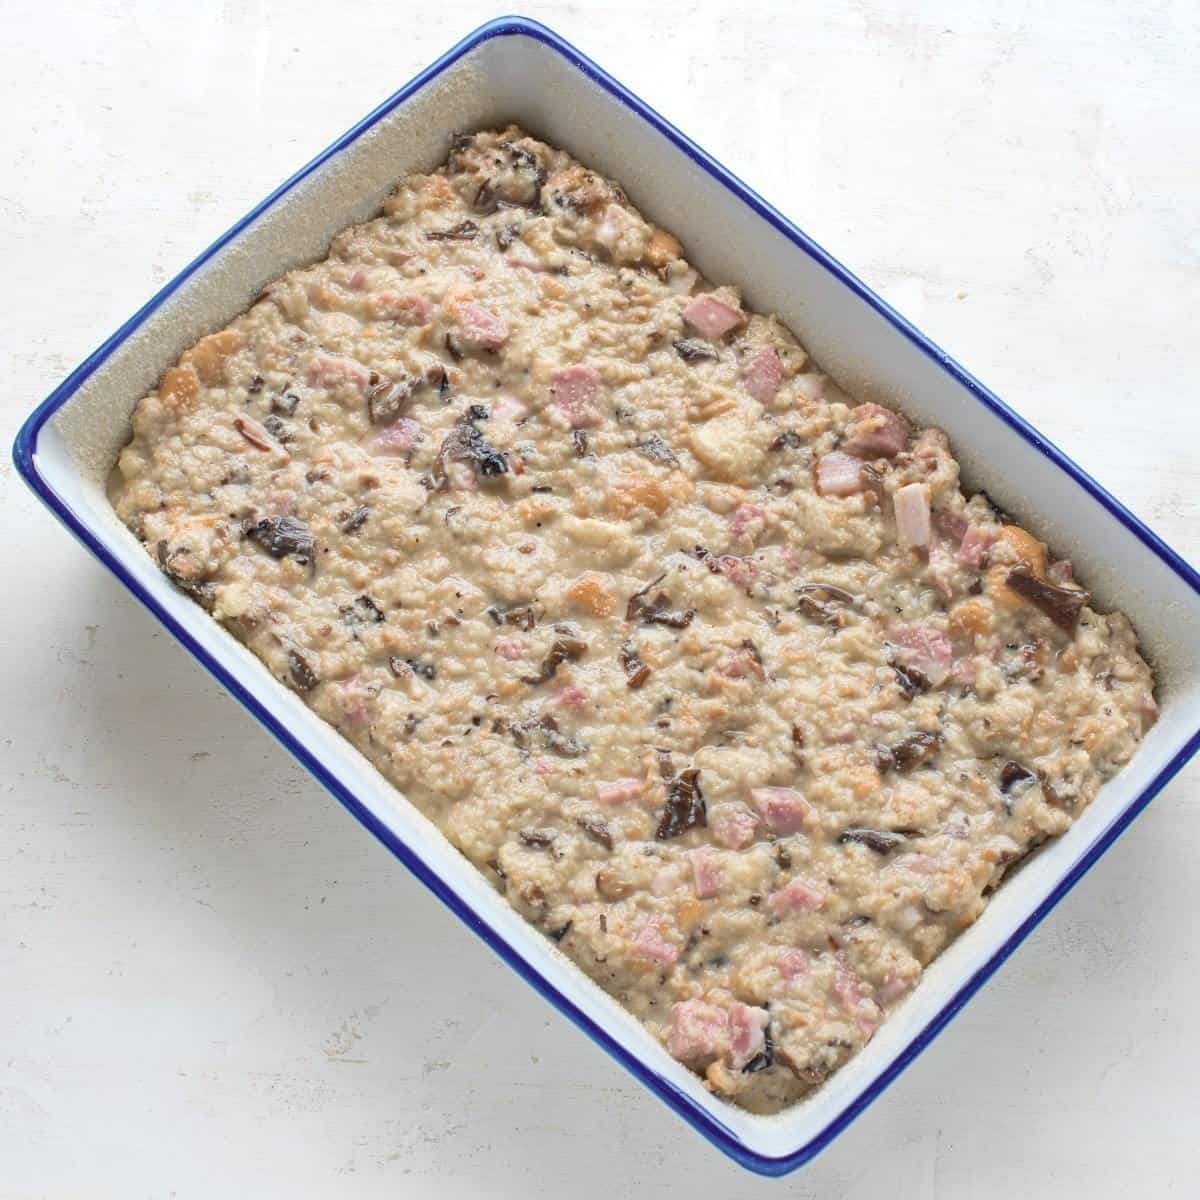 Muhroom bread pudding in a baking dish, before putting into the oven.